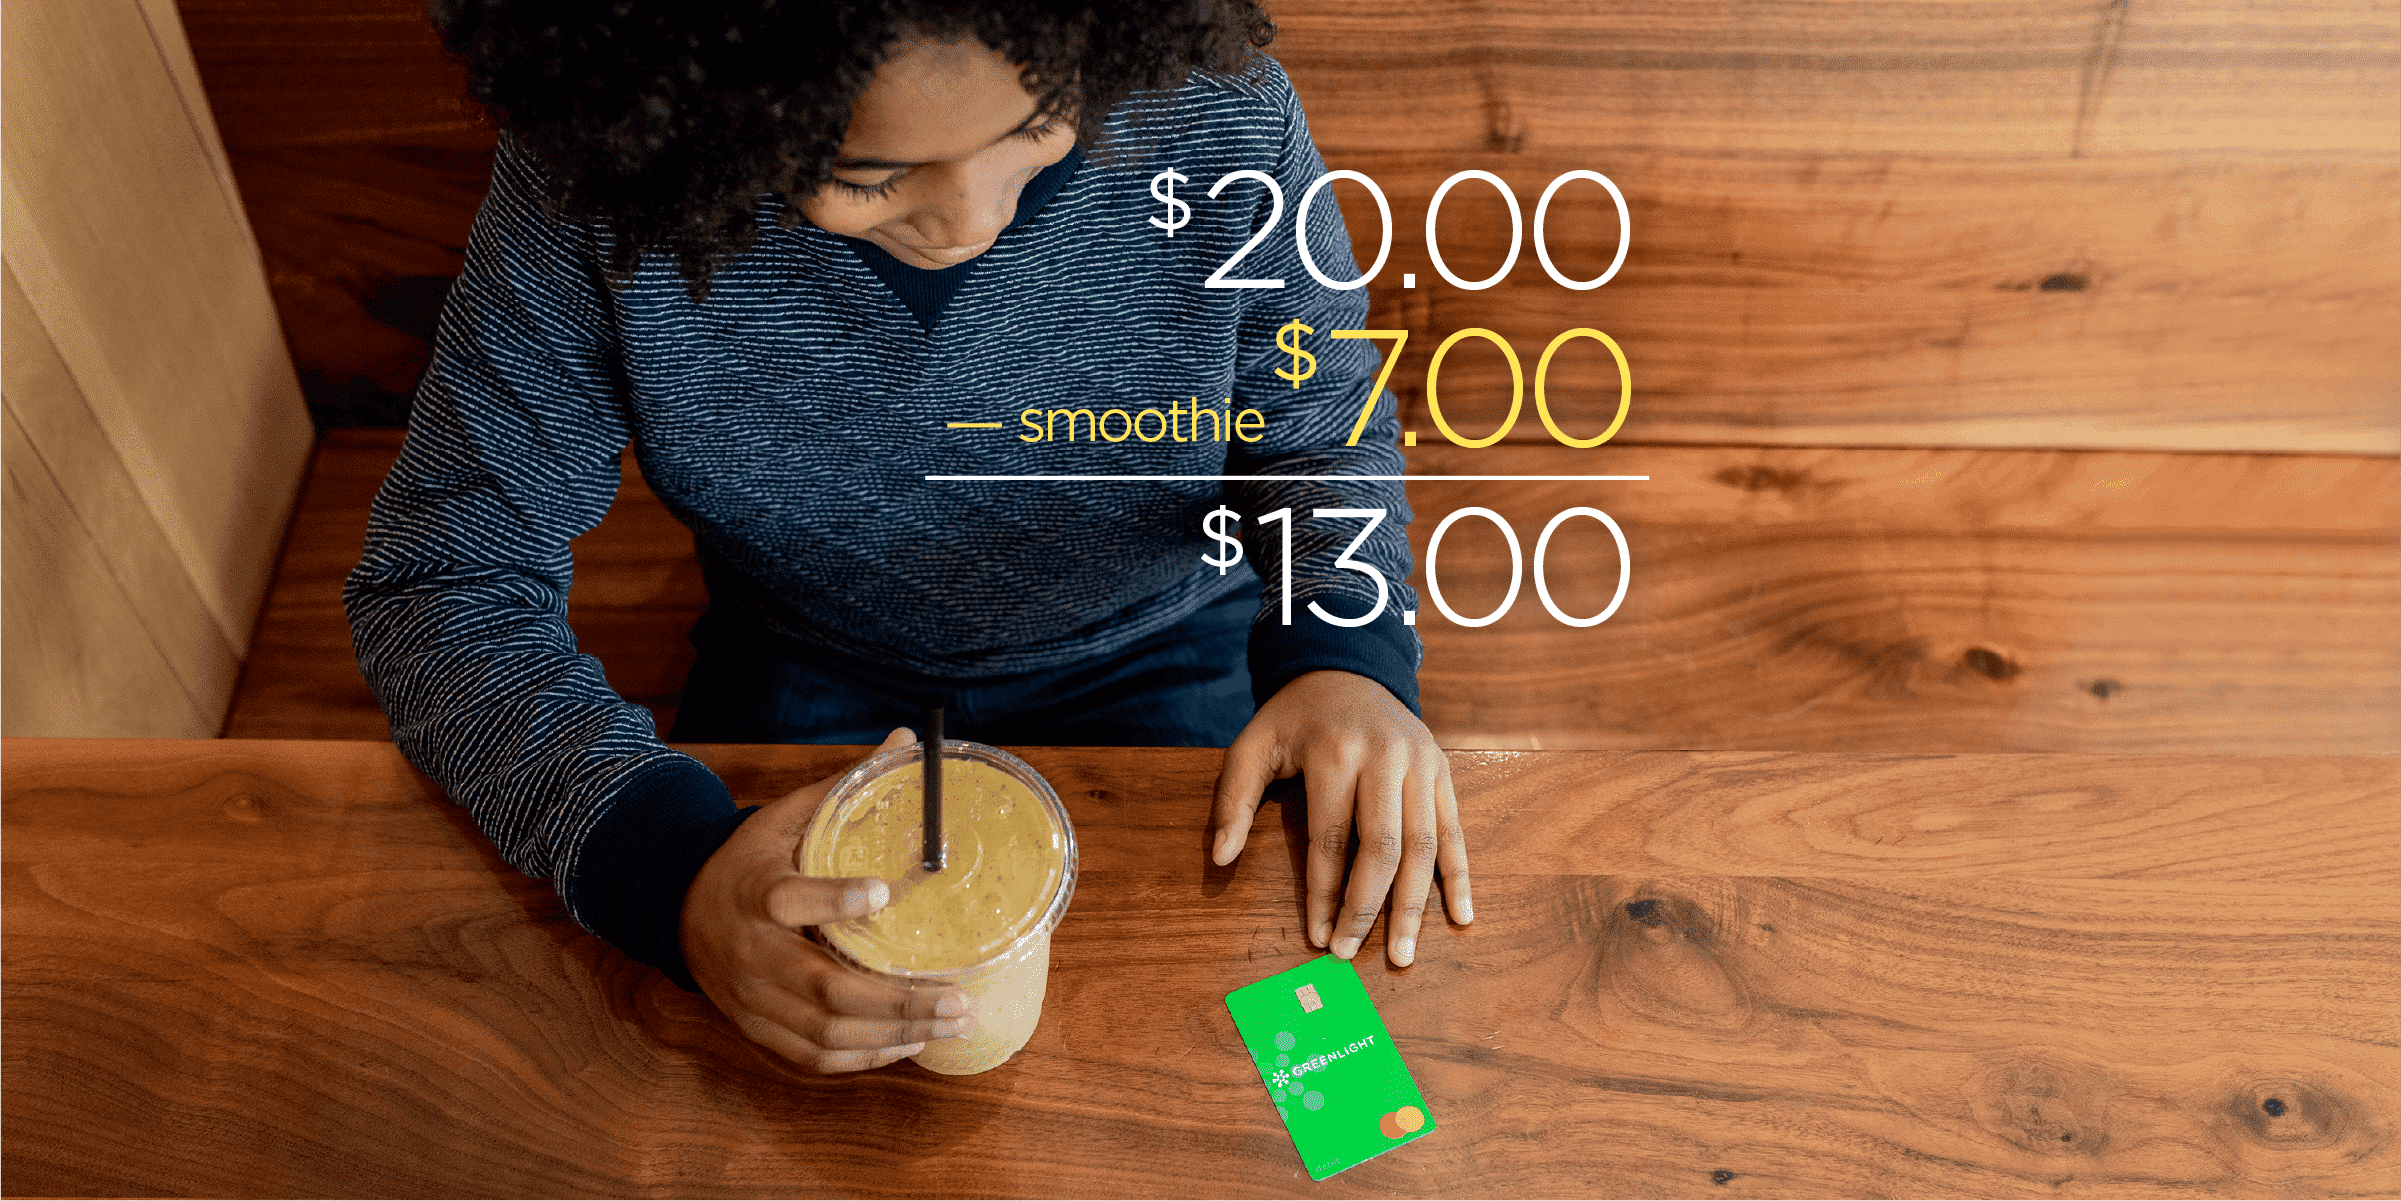 kid with a smoothie and greenlight debit card